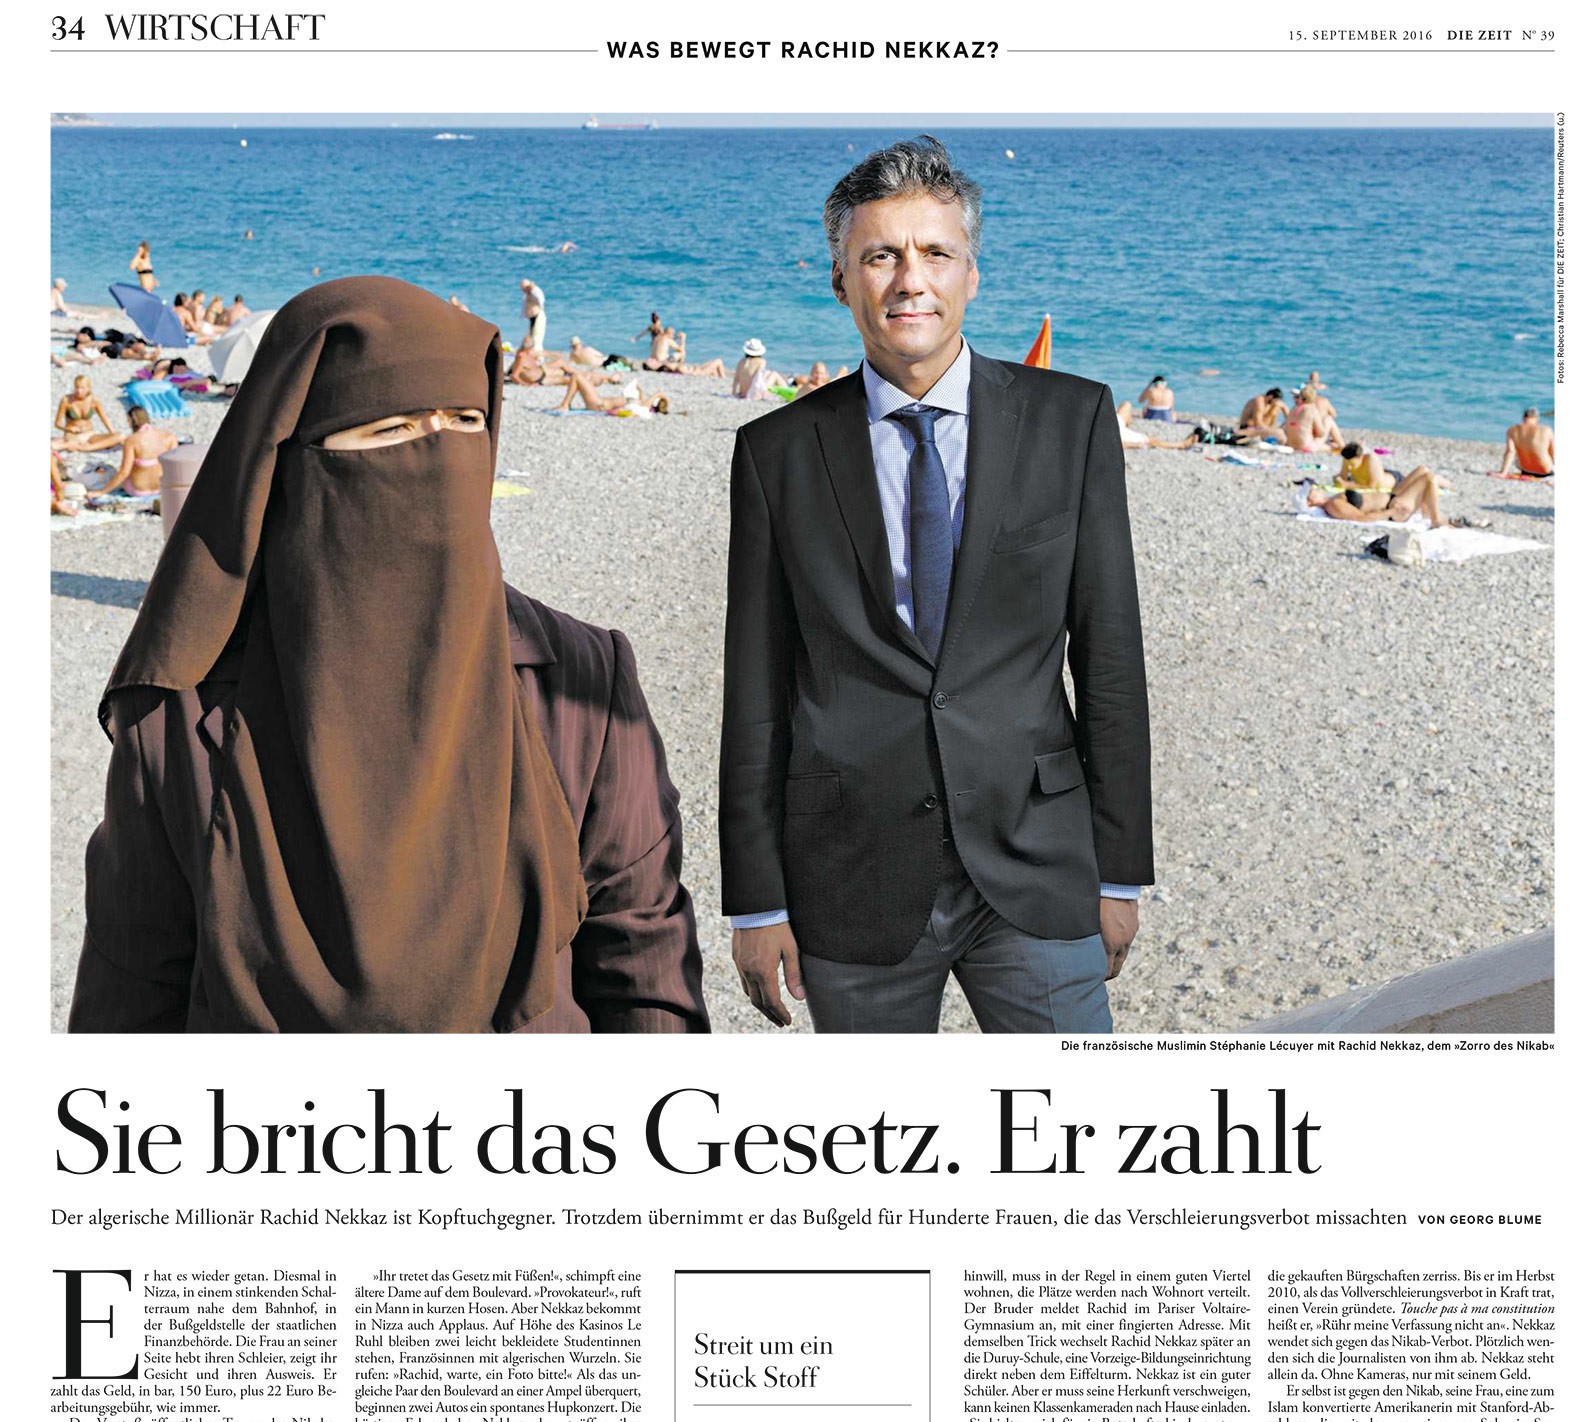 Part of newspaper page from Die Zeit showing portrait of woman in burqa and man in suit